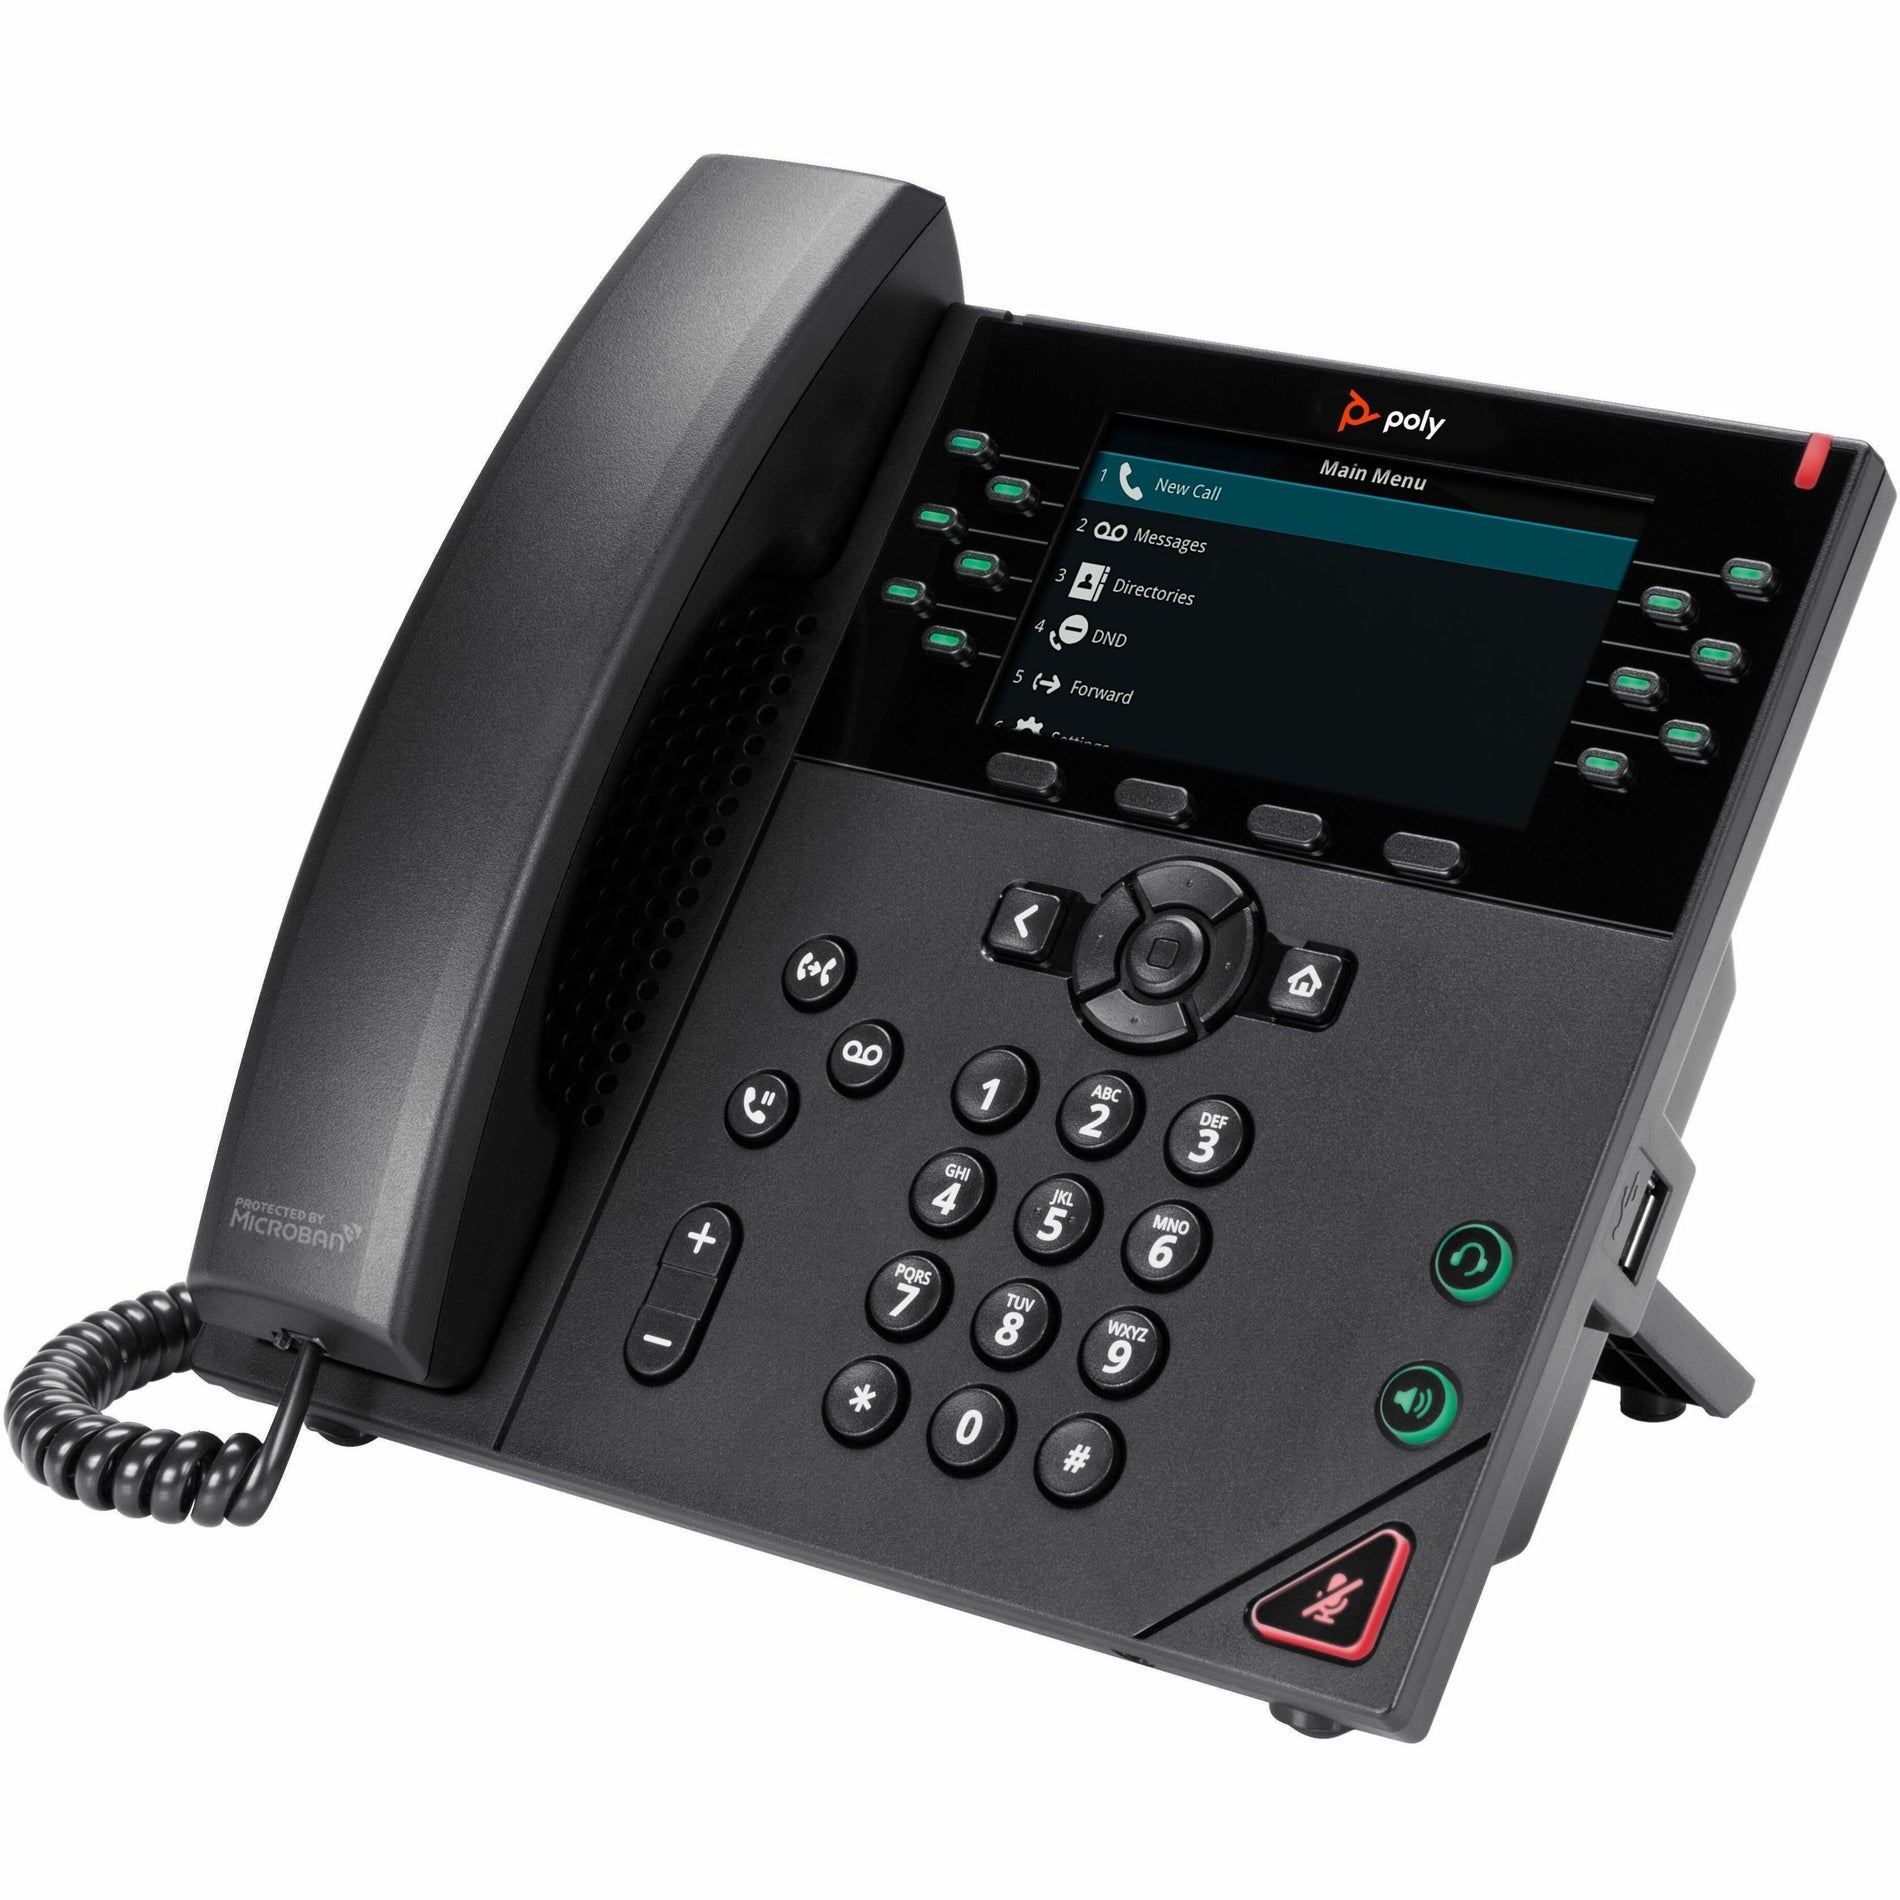 Poly VVX 450 12-Line IP Phone and PoE-Enabled with Power Supply, Energy Star, 1 Year Warranty